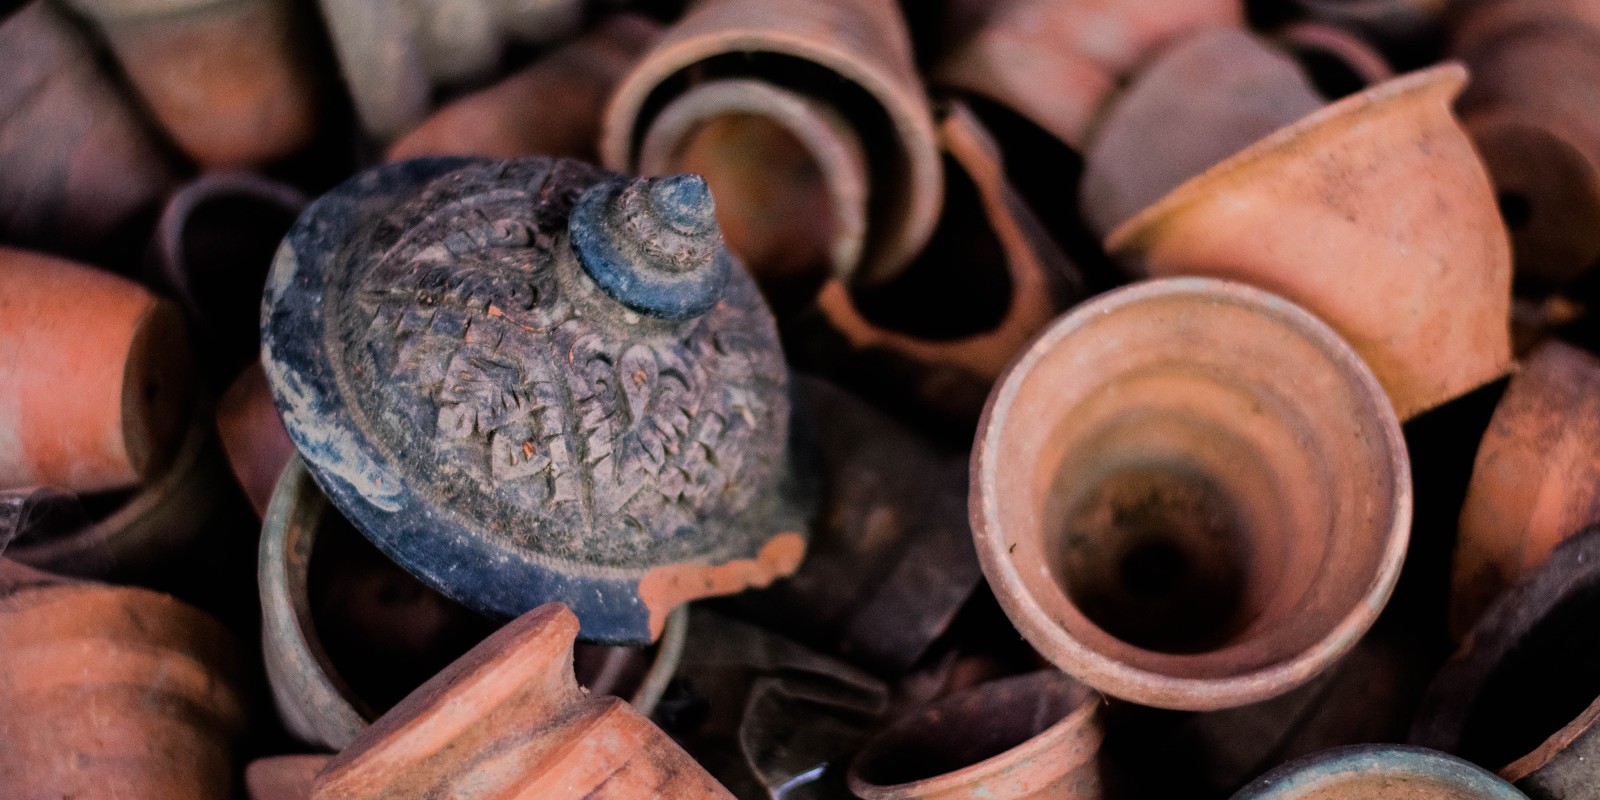 Discover Ko Kret, famous for intricate pottery